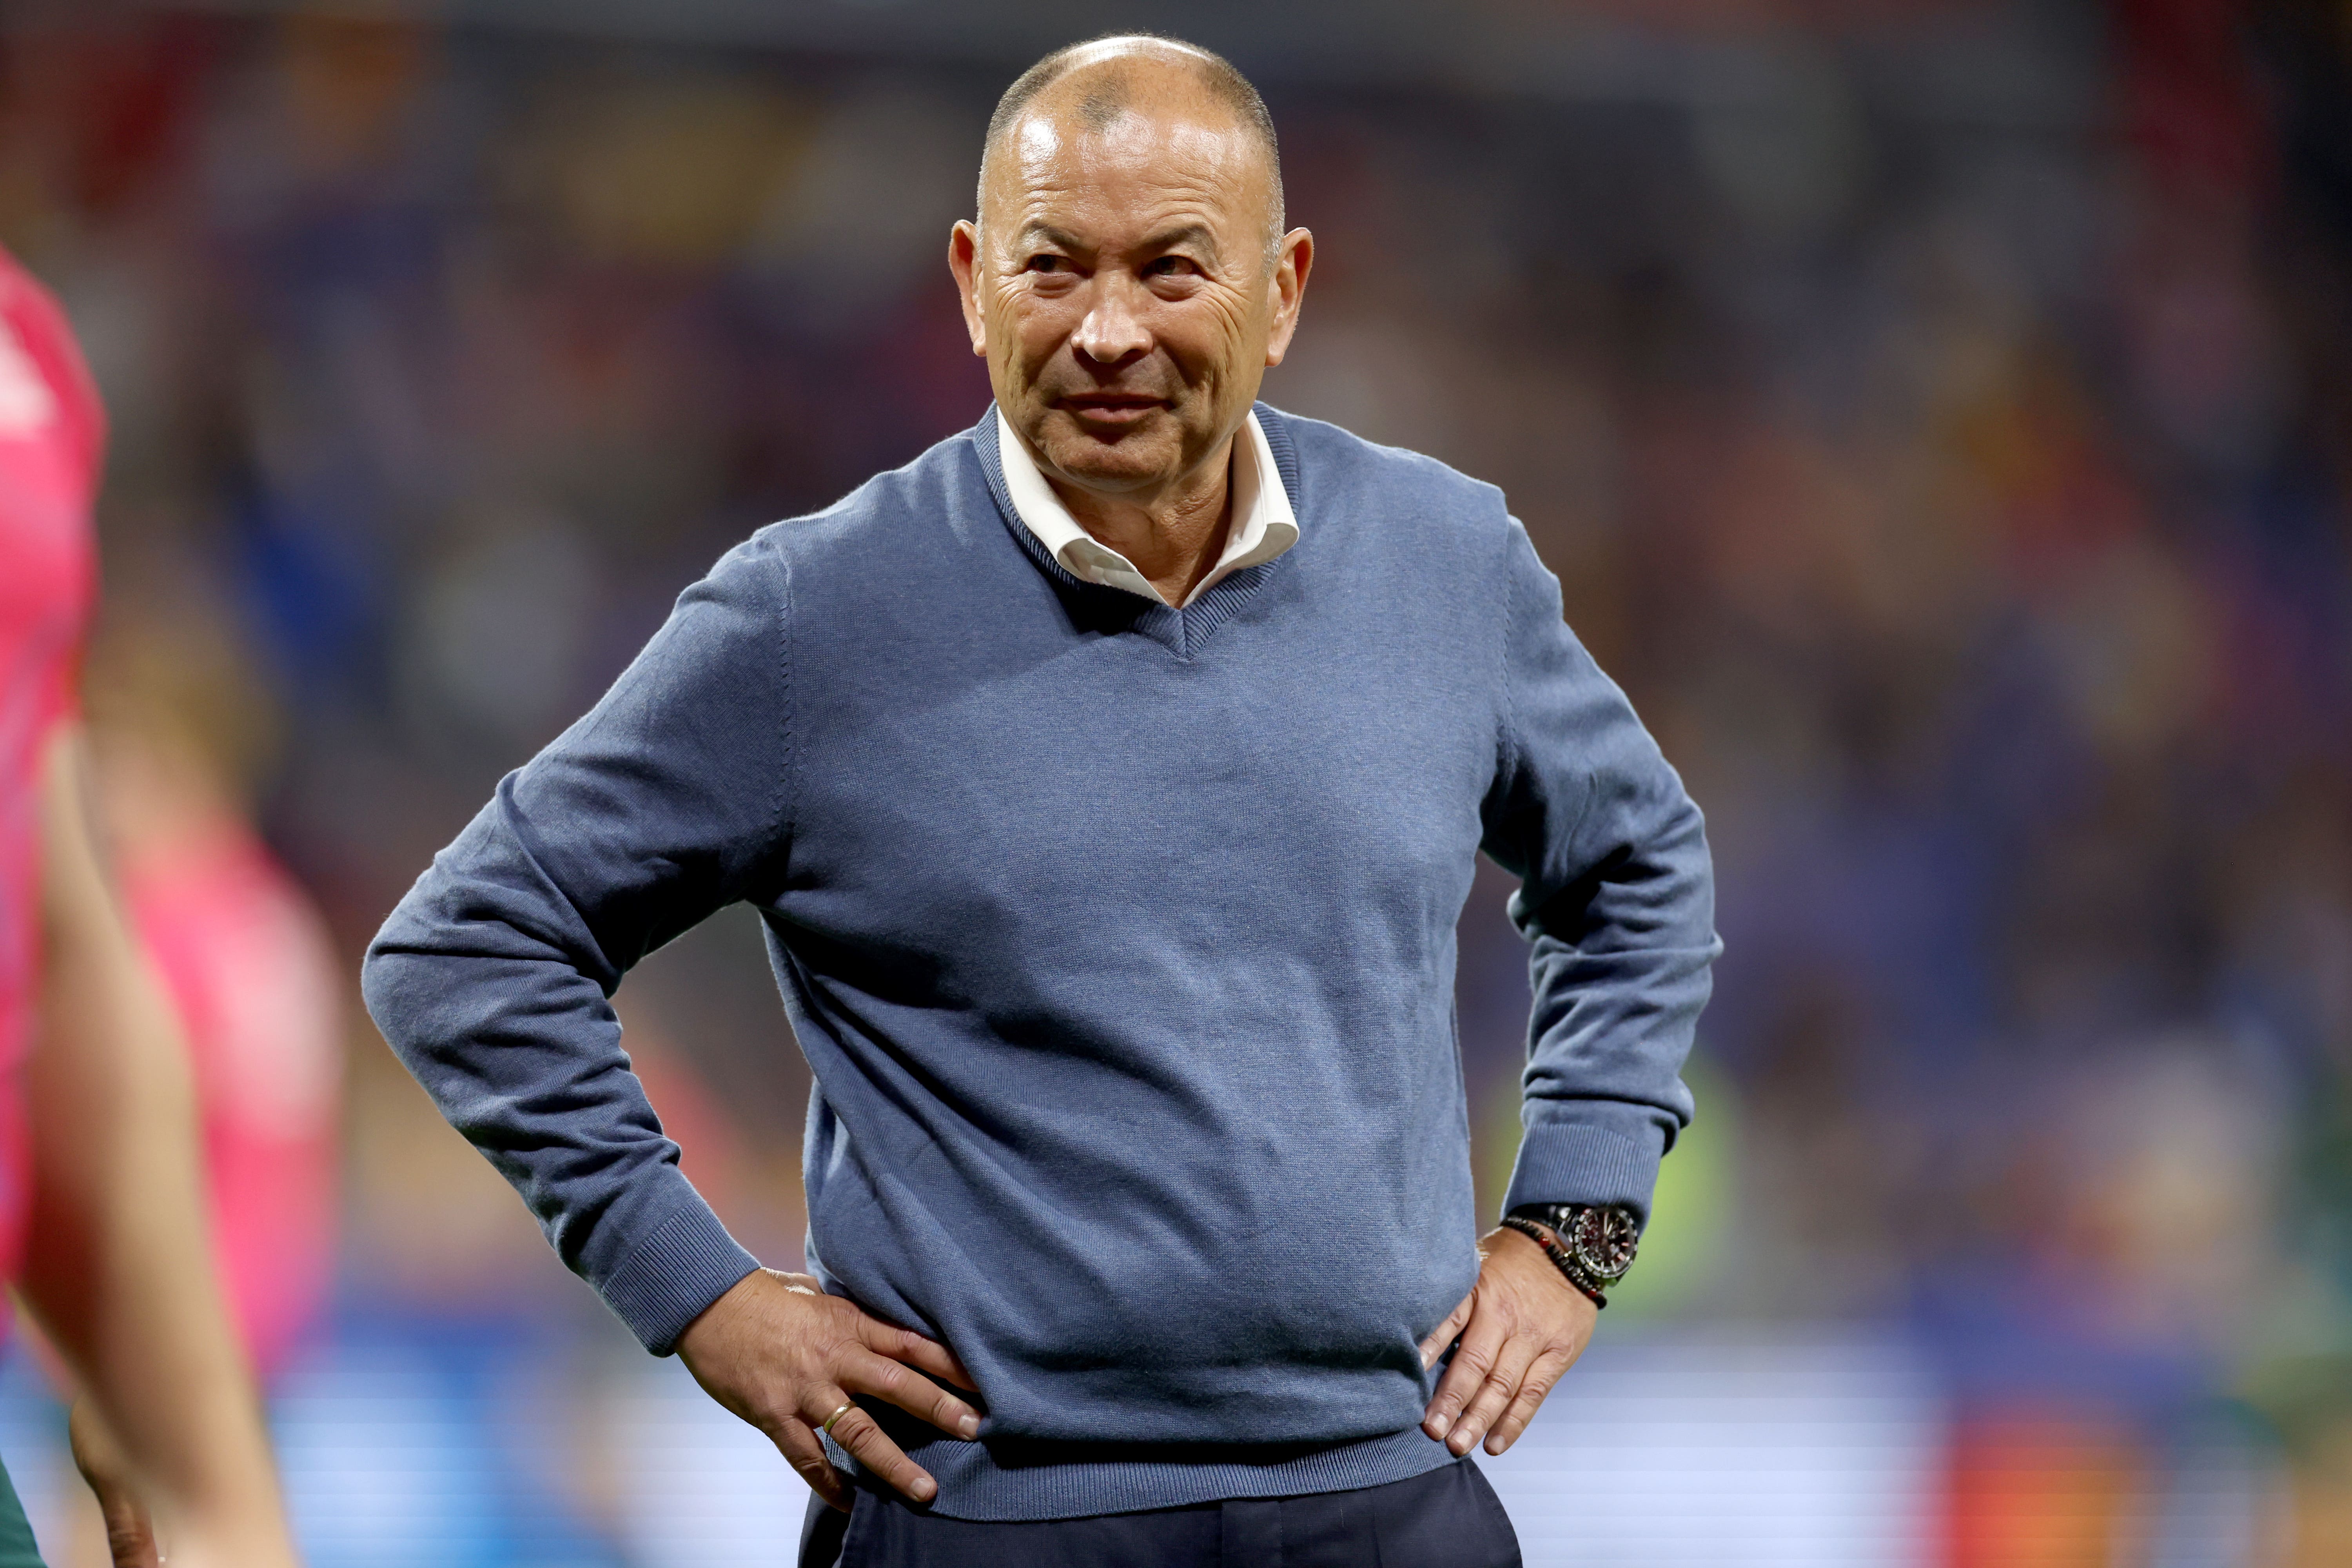 Eddie Jones is facing England for the first time since he was sacked